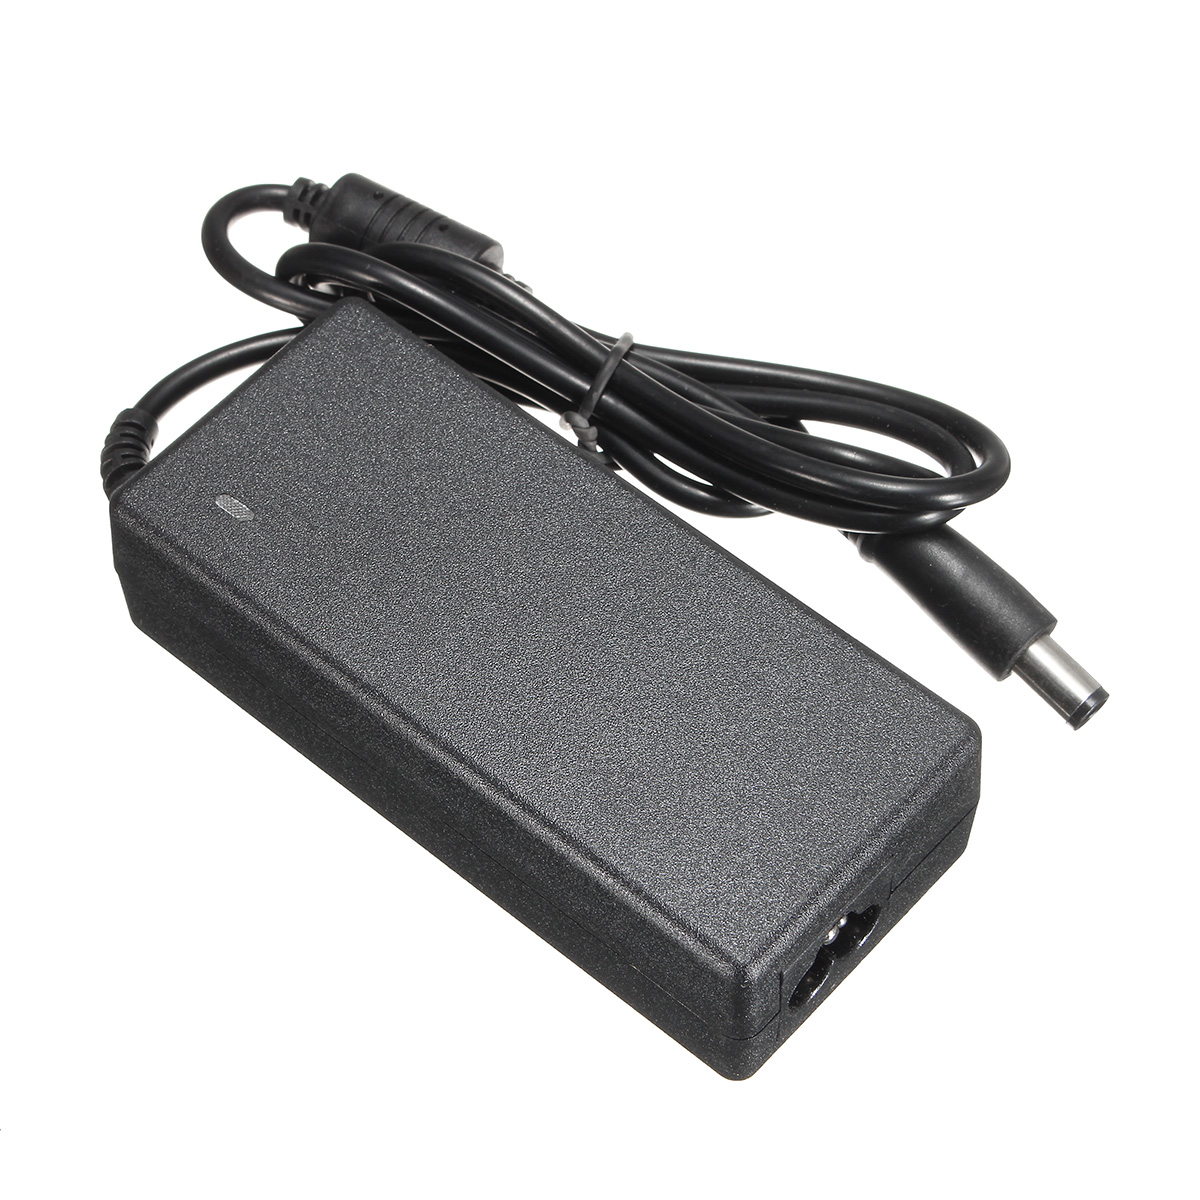 65W-Replacement-AC-Adapter-For-HP-Pavilion-G4-G5-G6-G7-Notebook-1201182-1